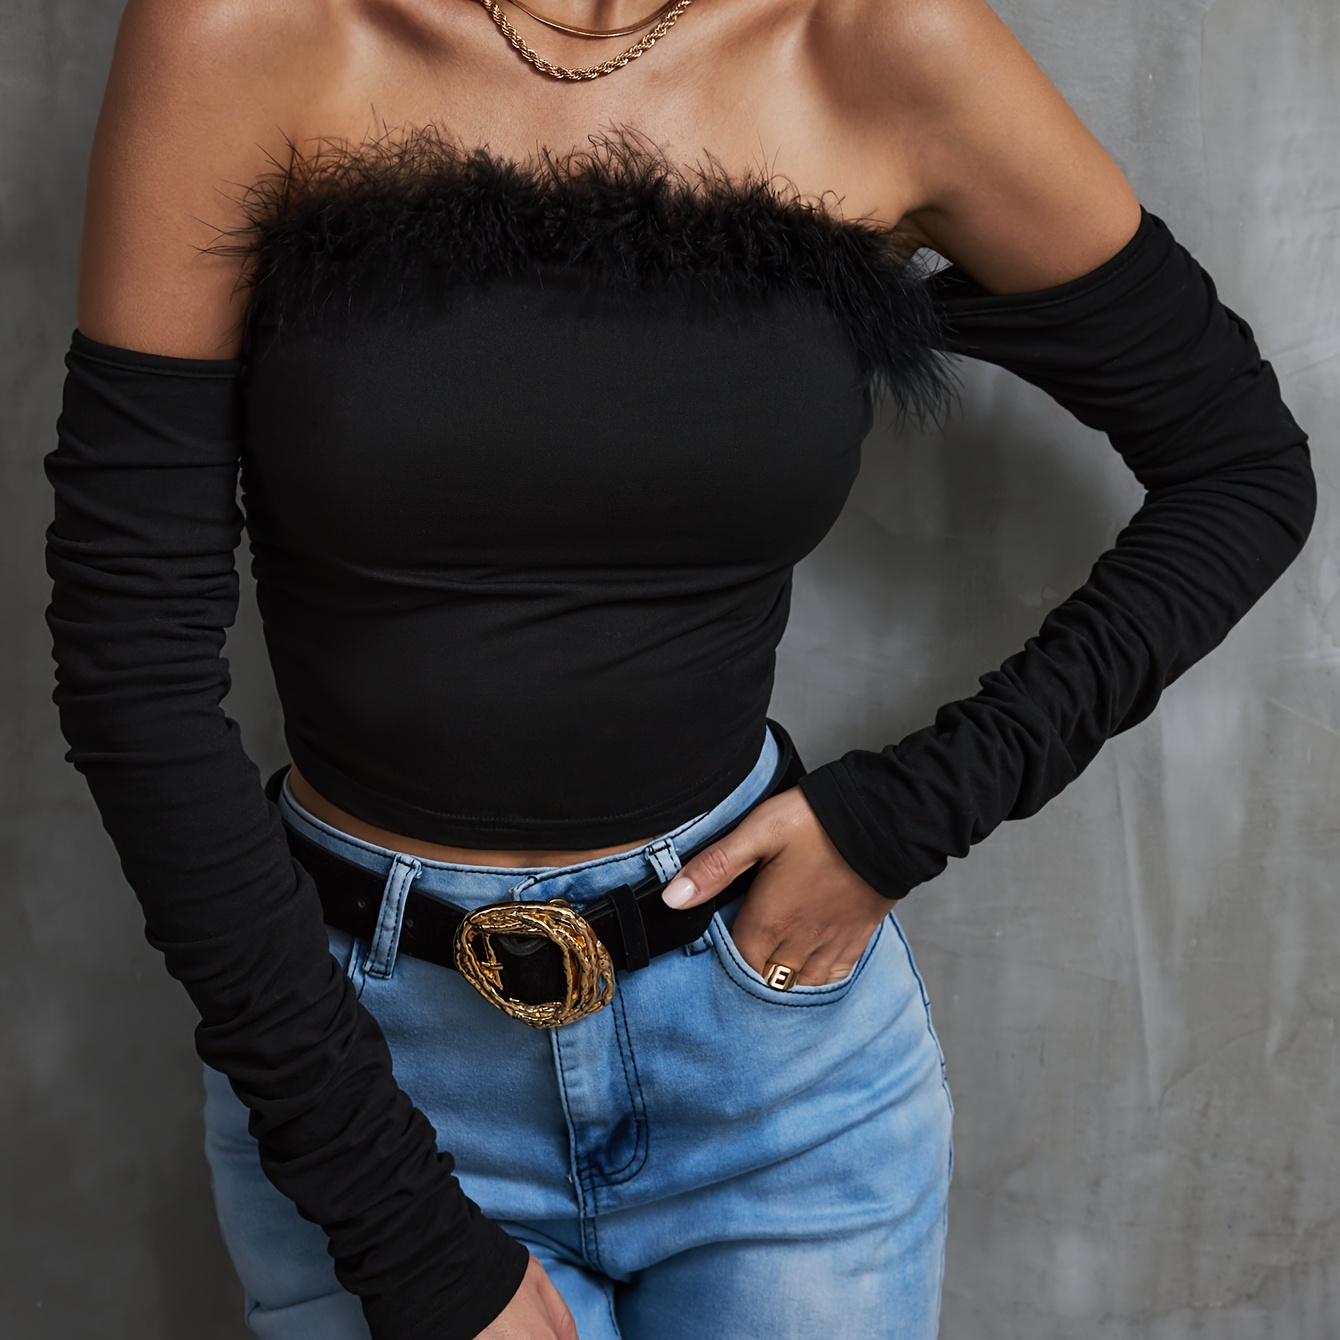 Faux Fur Trim Off-shoulder Top, Stylish Long Sleeve Cropped Top For Summer, Women's Clothing